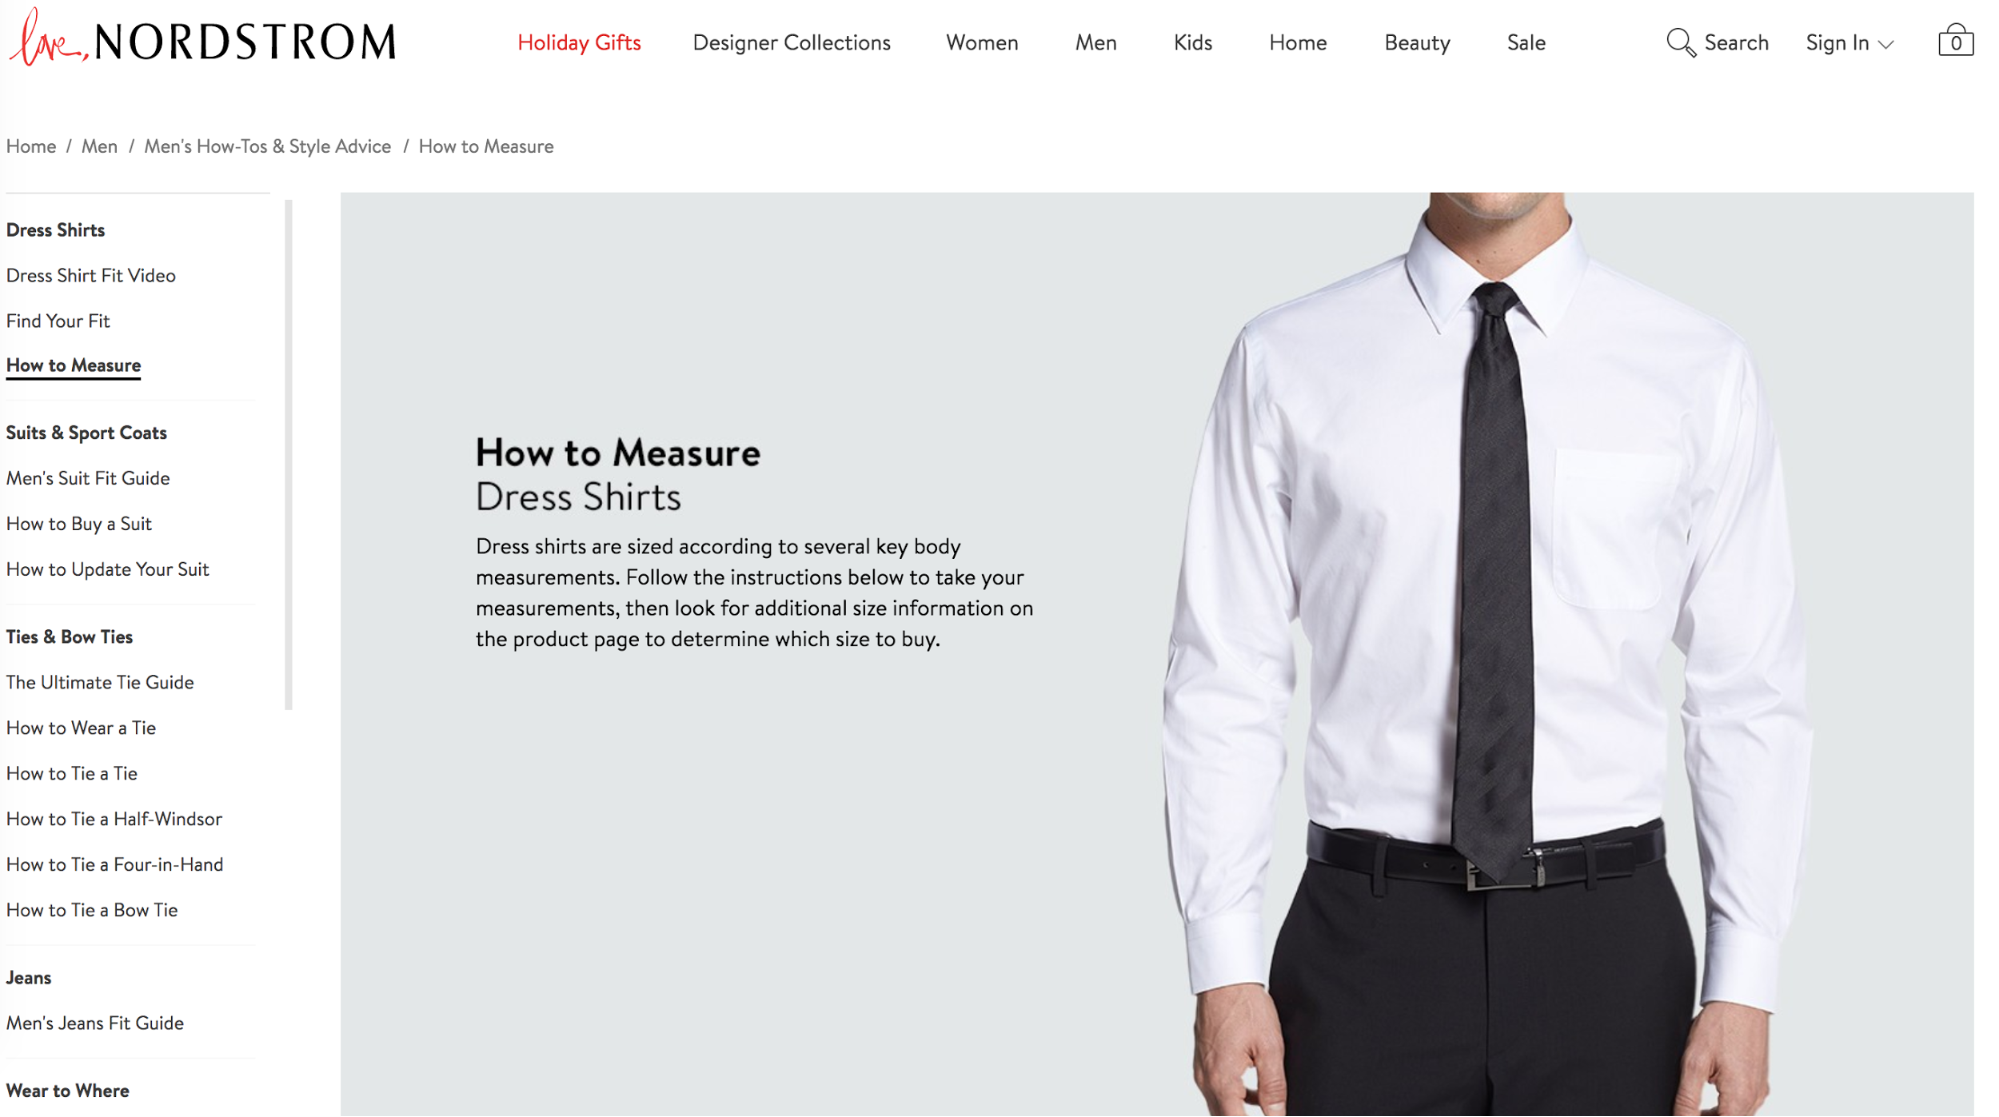 Screenshot showing a page on nordstrom.com